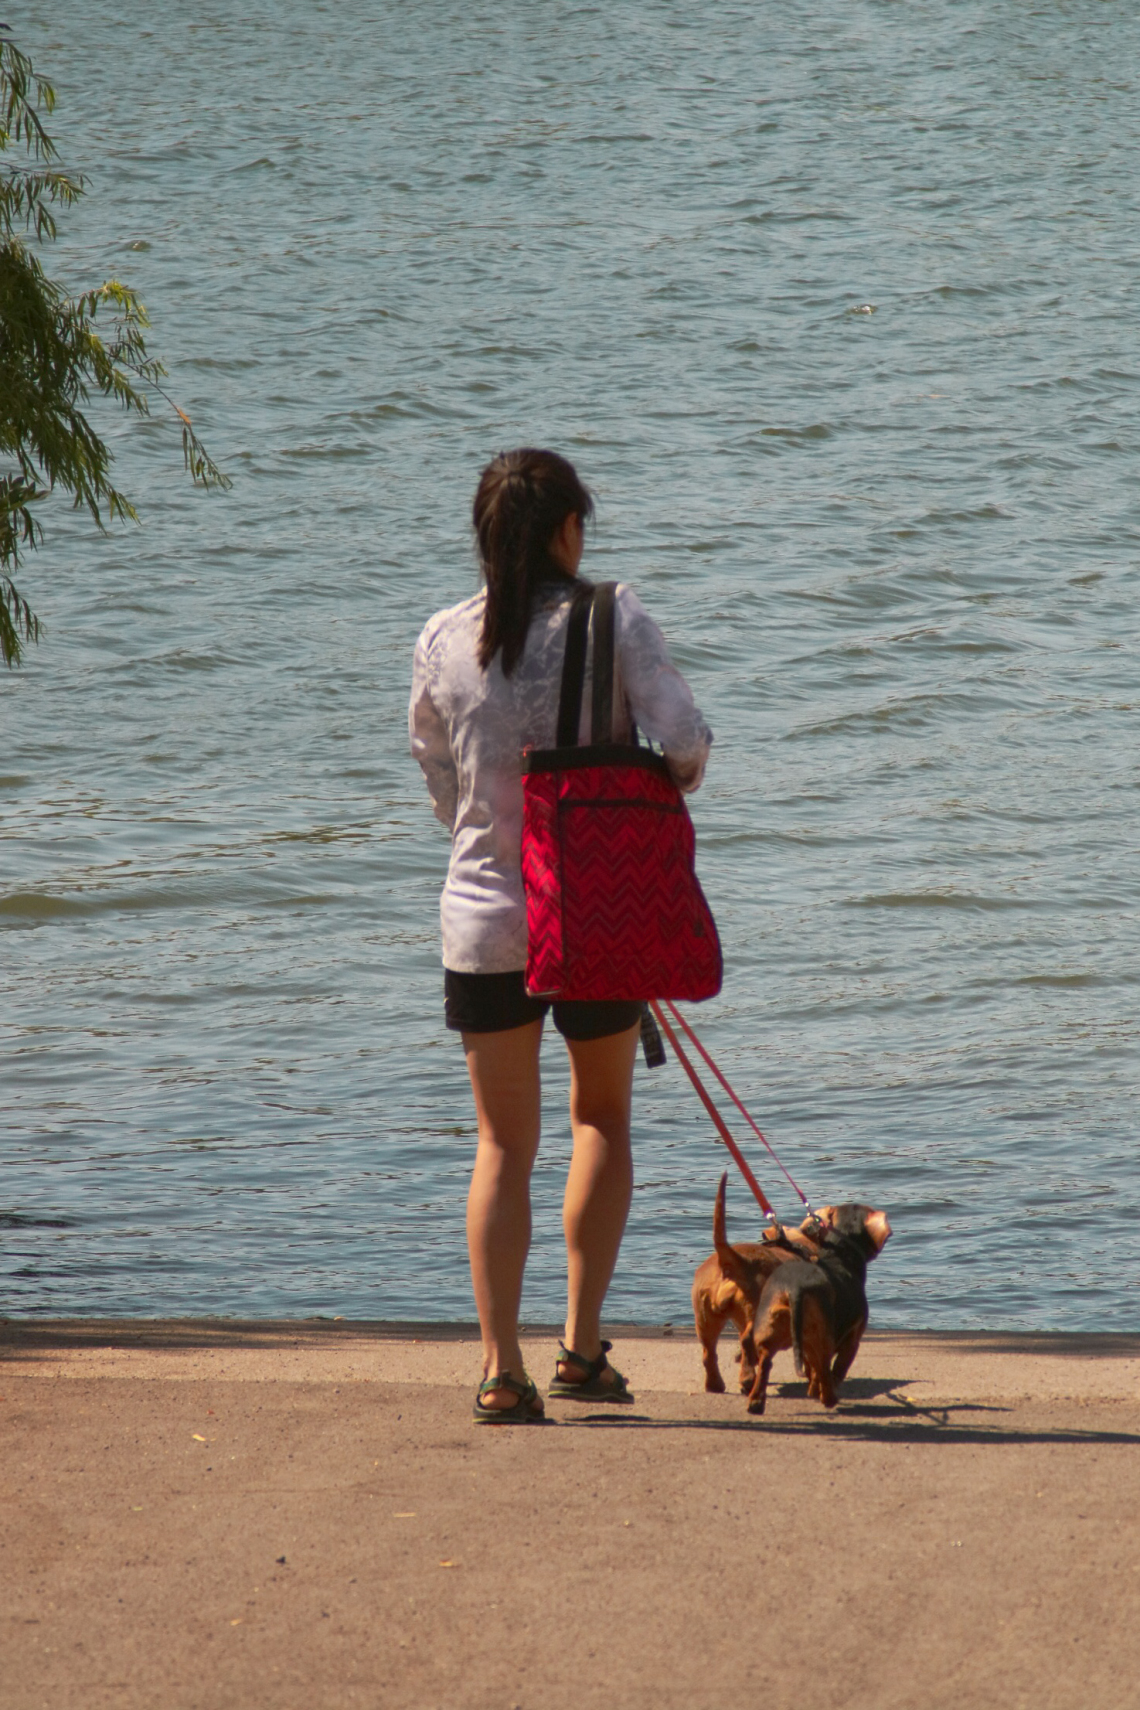 Photo of a person with a dog standing on the edge of the water